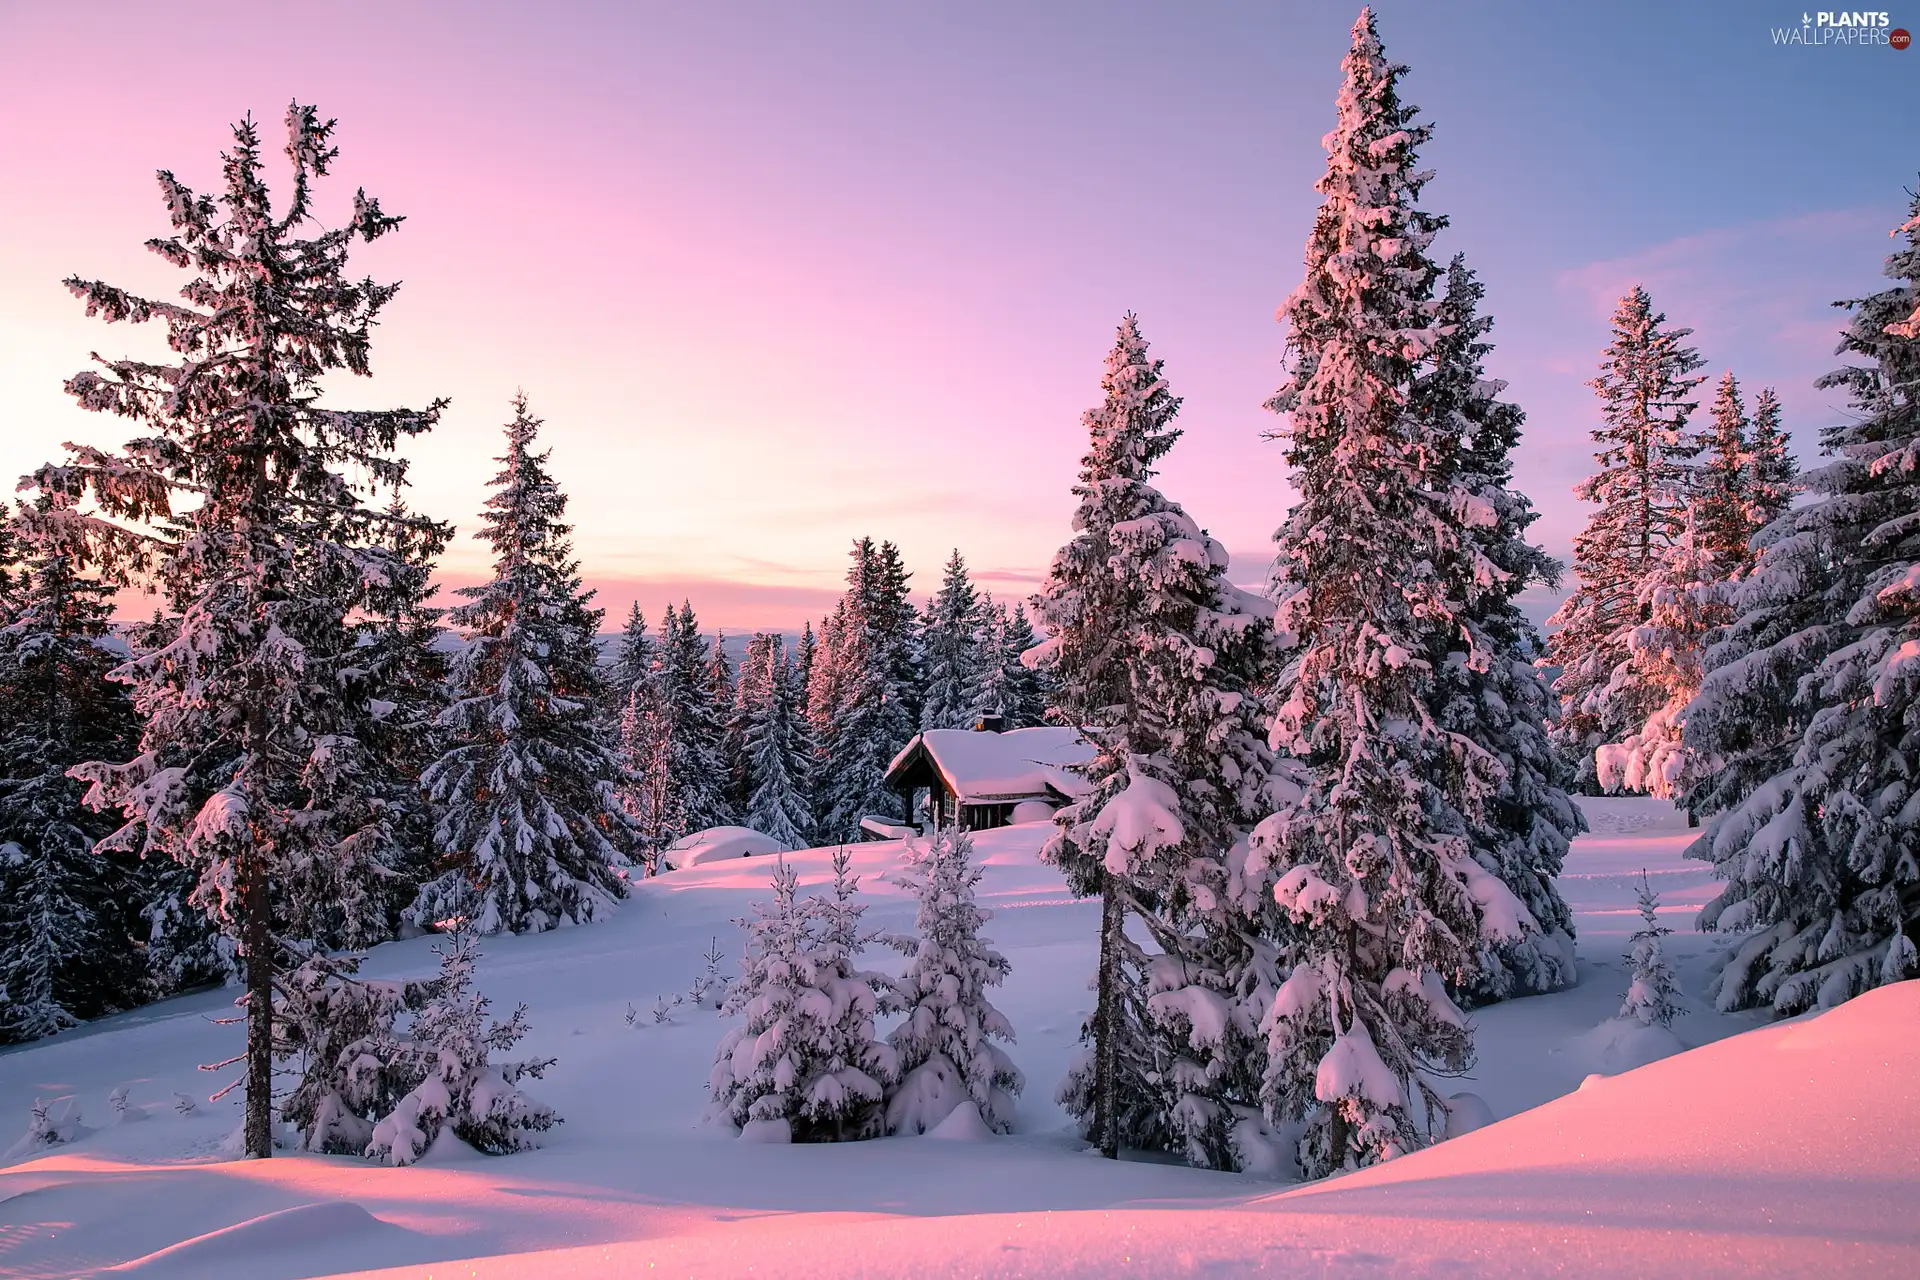 trees, viewes, winter, forest, Sunrise, Snowy, house, Mountains